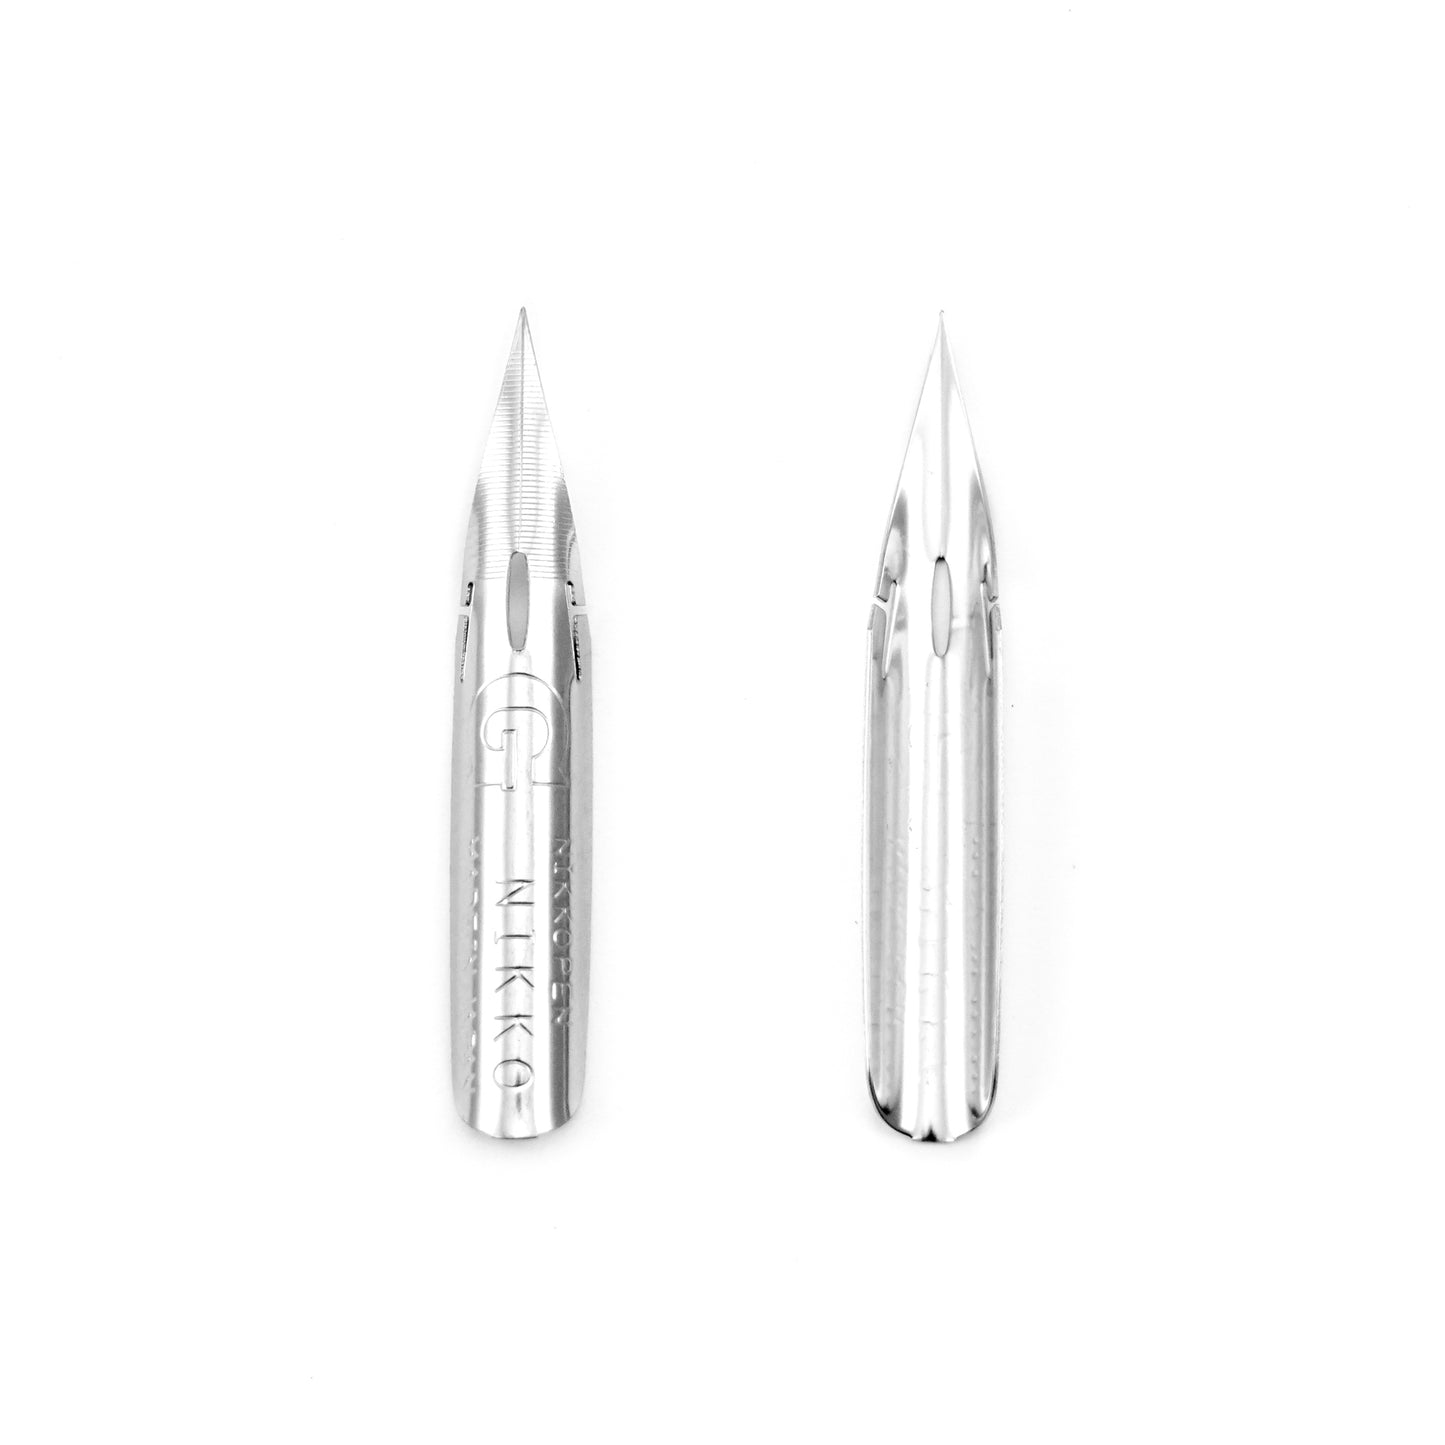 Nikko G Drawing and Calligraphy Nibs - 2/pack - by Nikko - K. A. Artist Shop